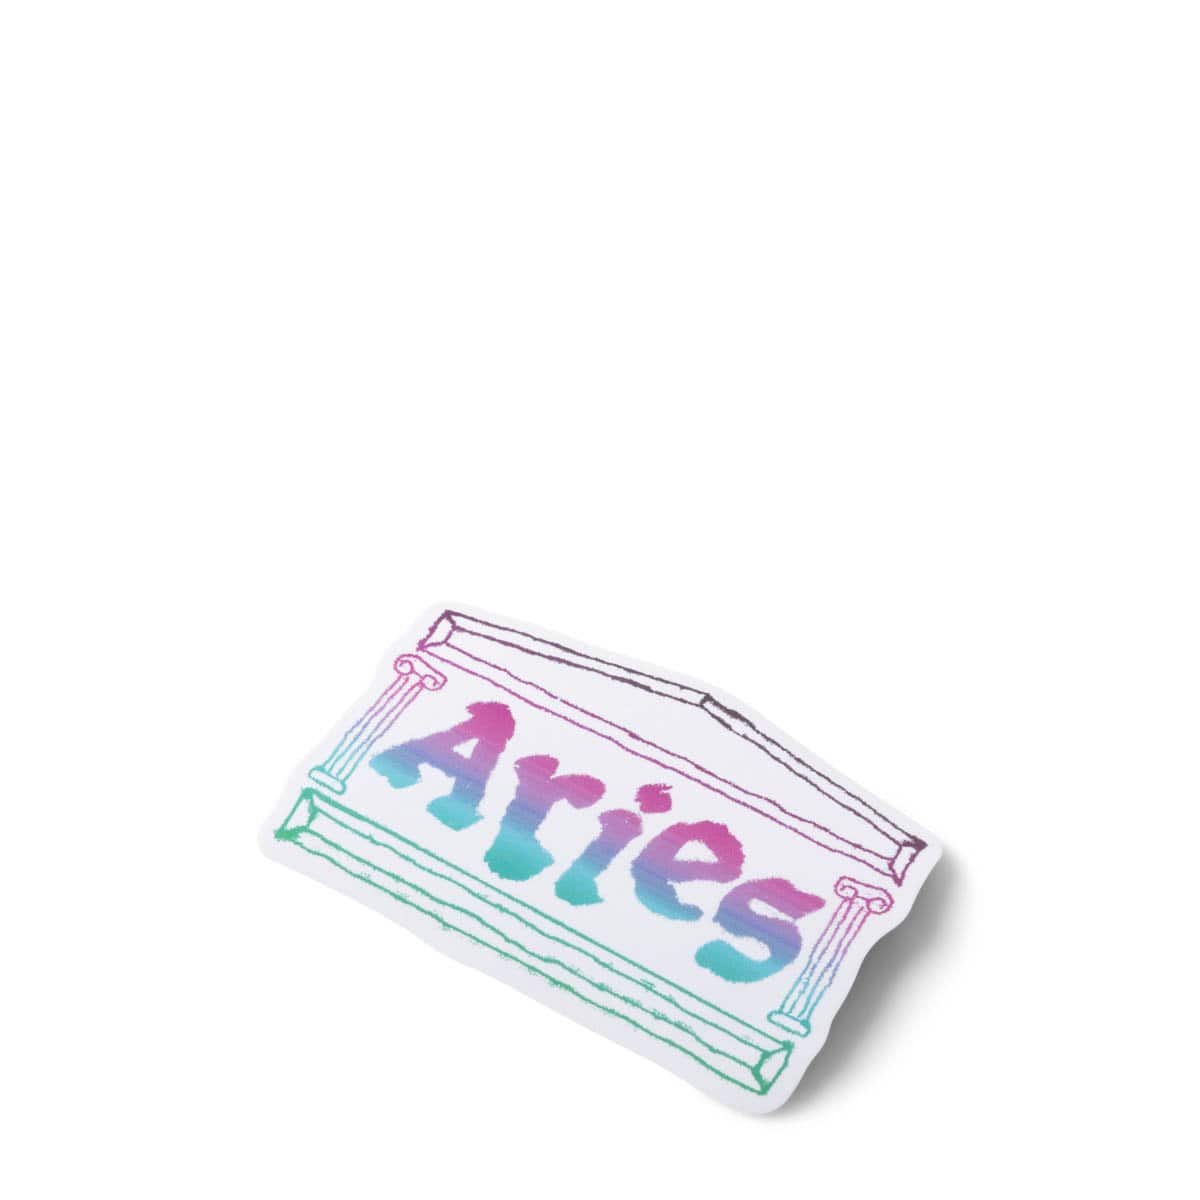 Aries Odds & Ends BLACK / O/S AW21 STICKER PACK